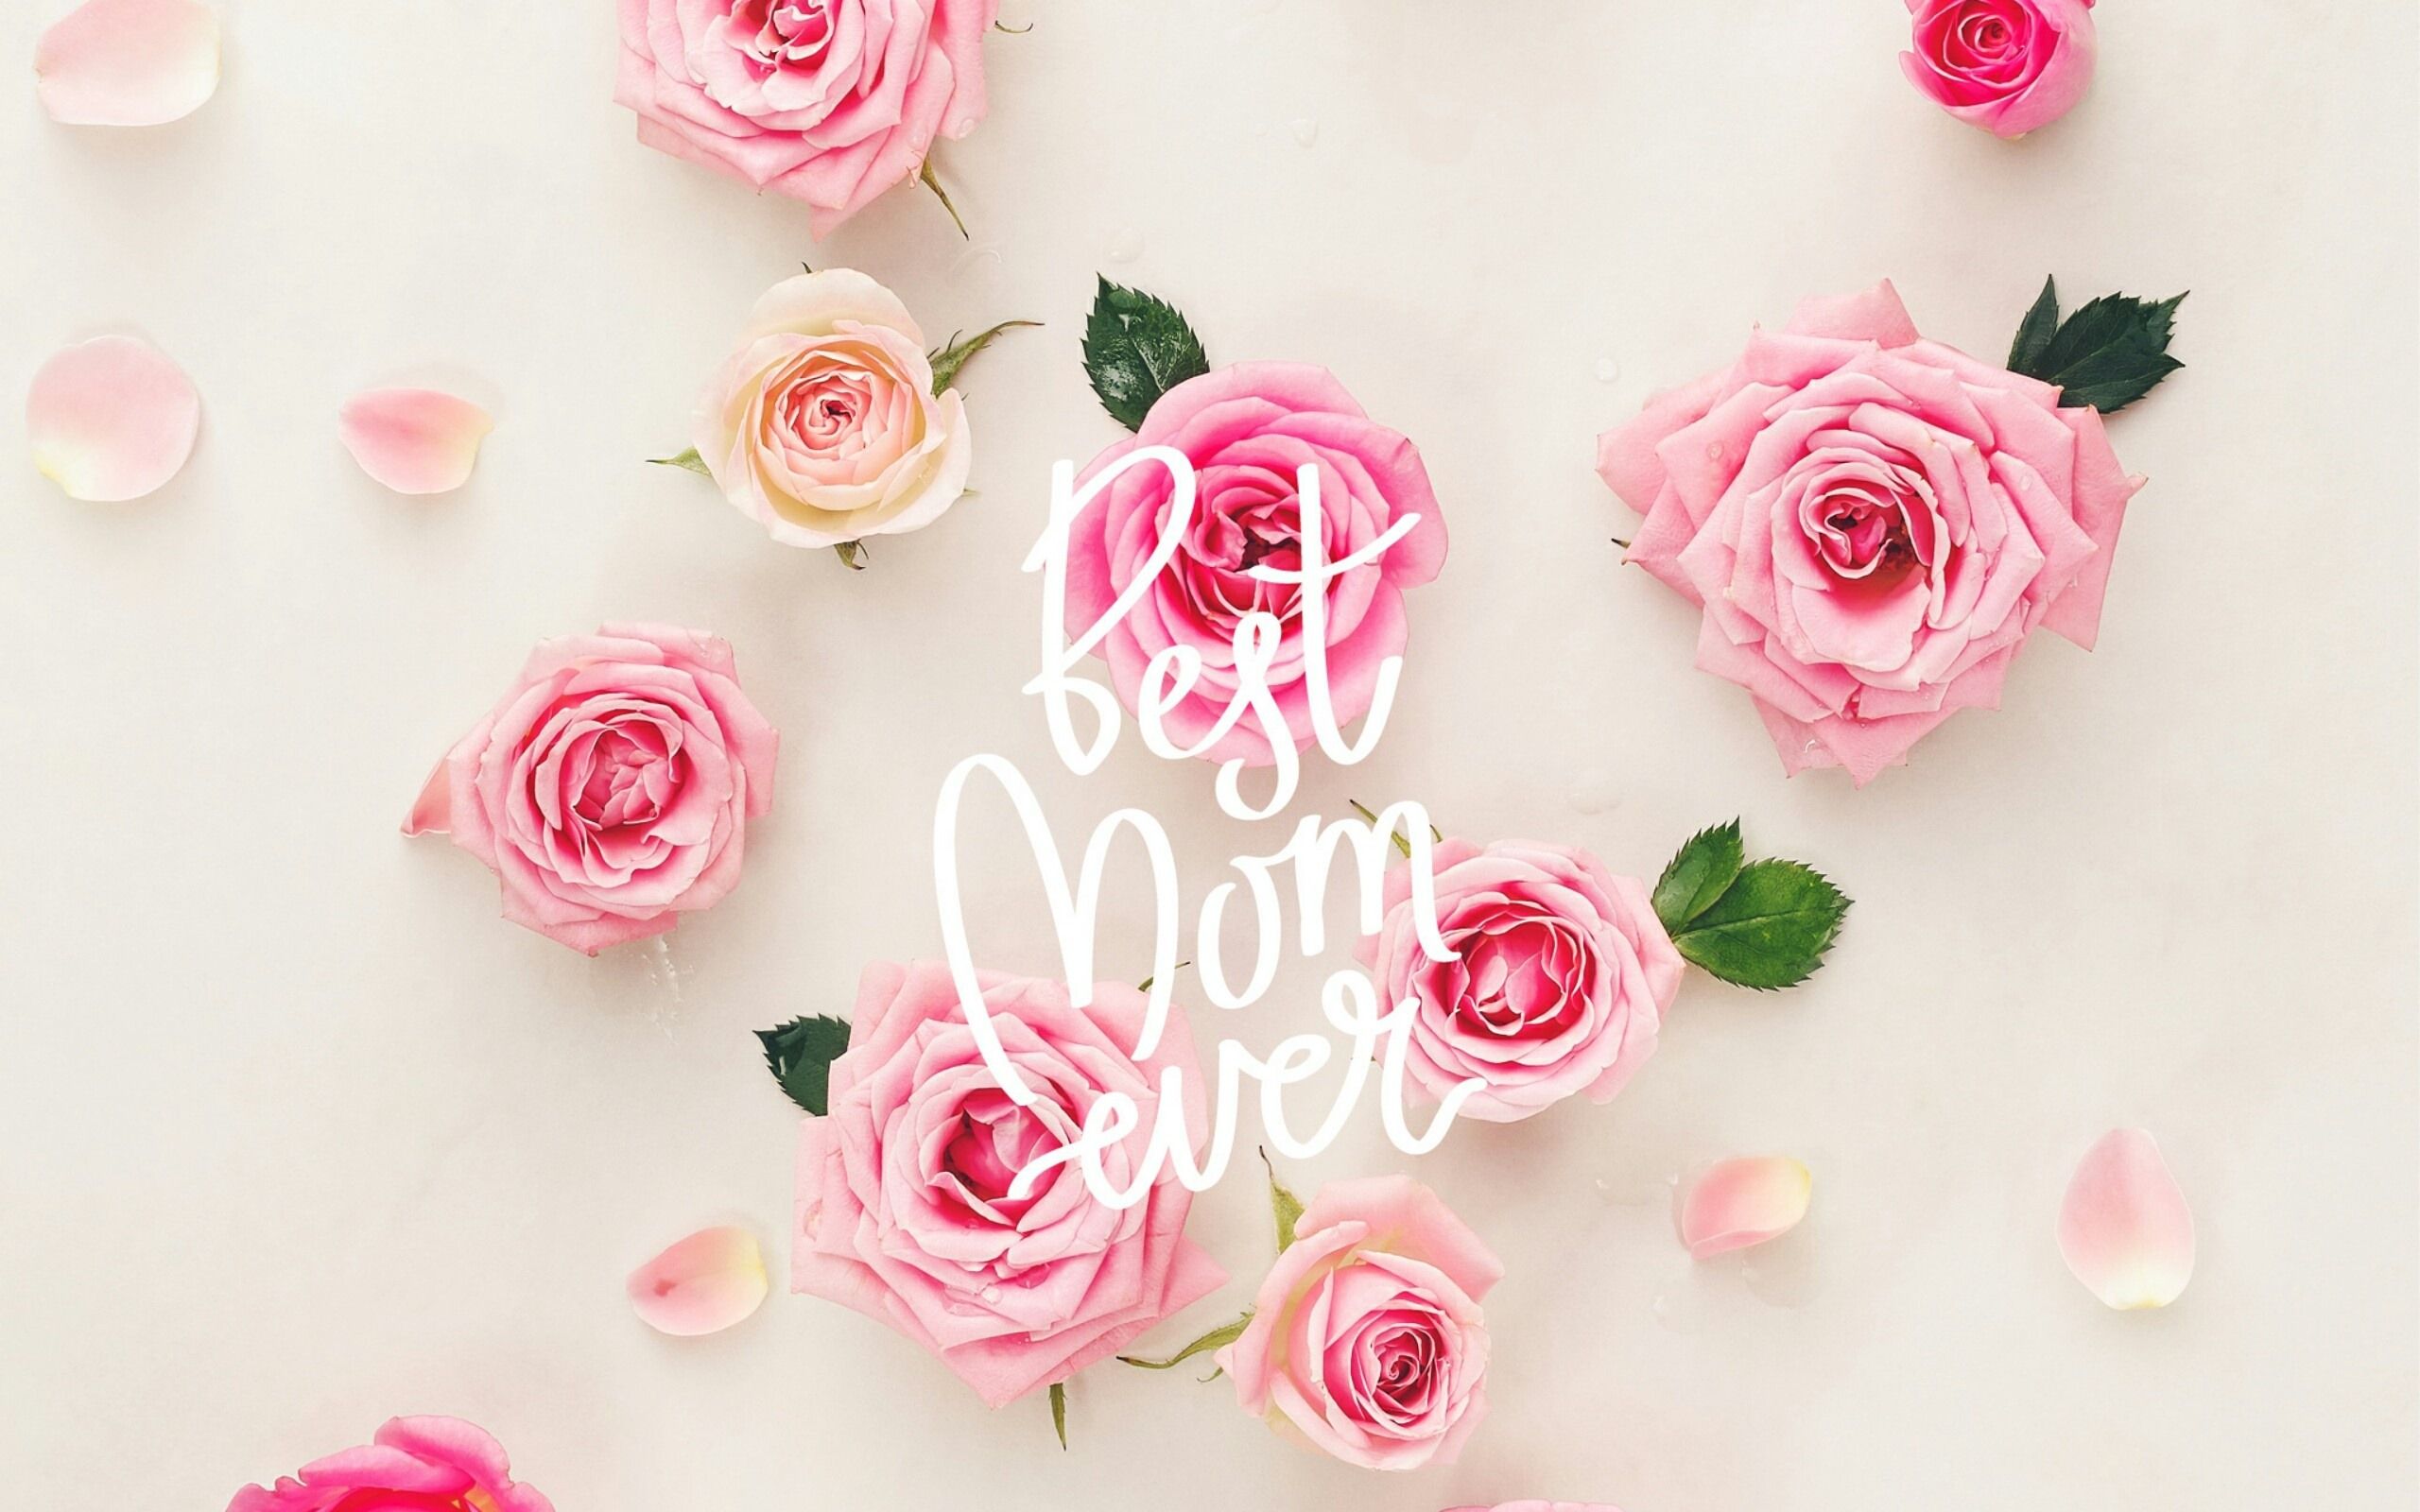 Download wallpaper Best mom ever, Mothers Day, May pink roses